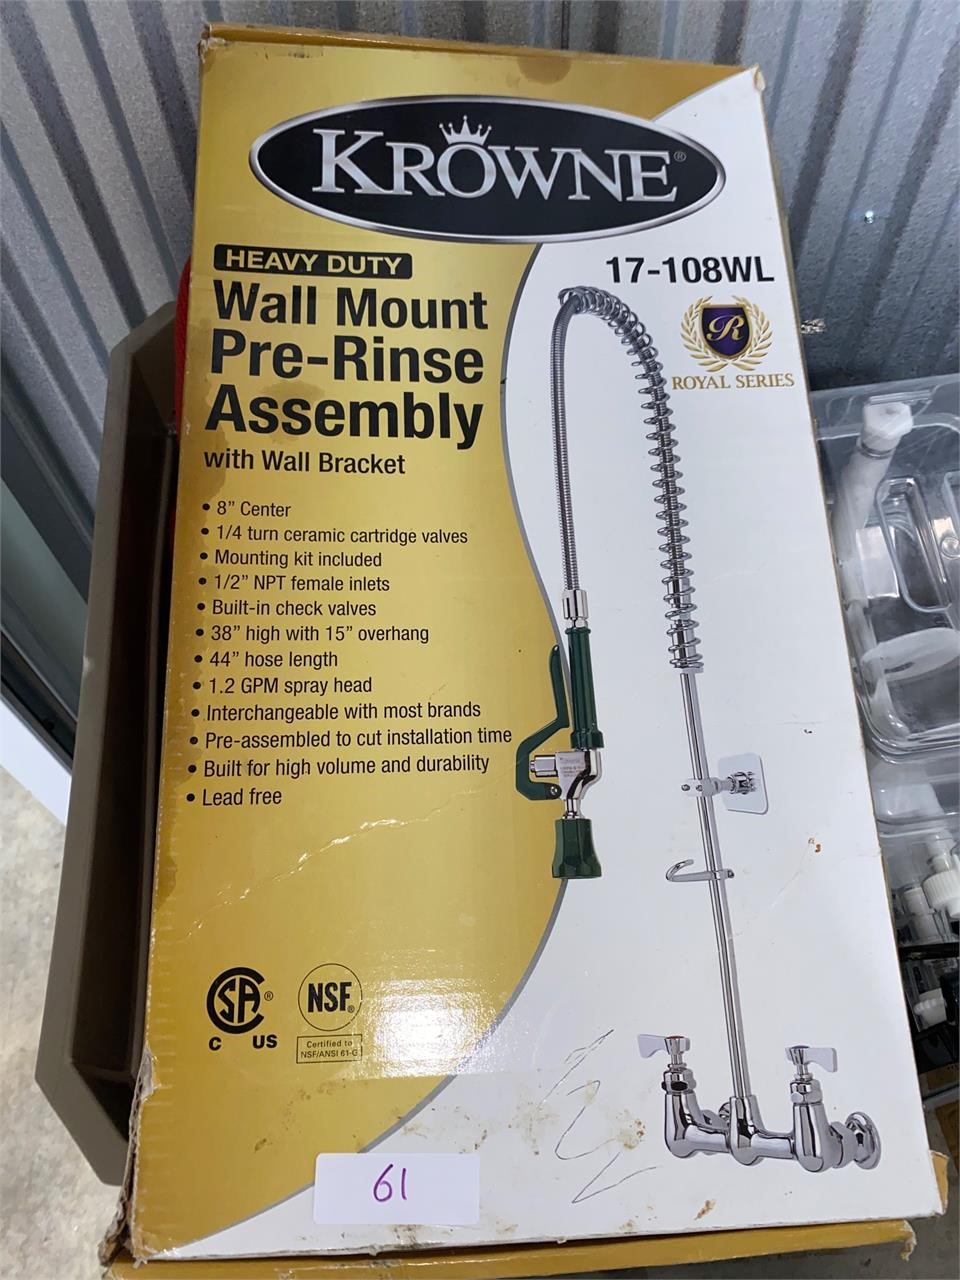 New! Krowne Wall Mount Pre-Rinse Assembly